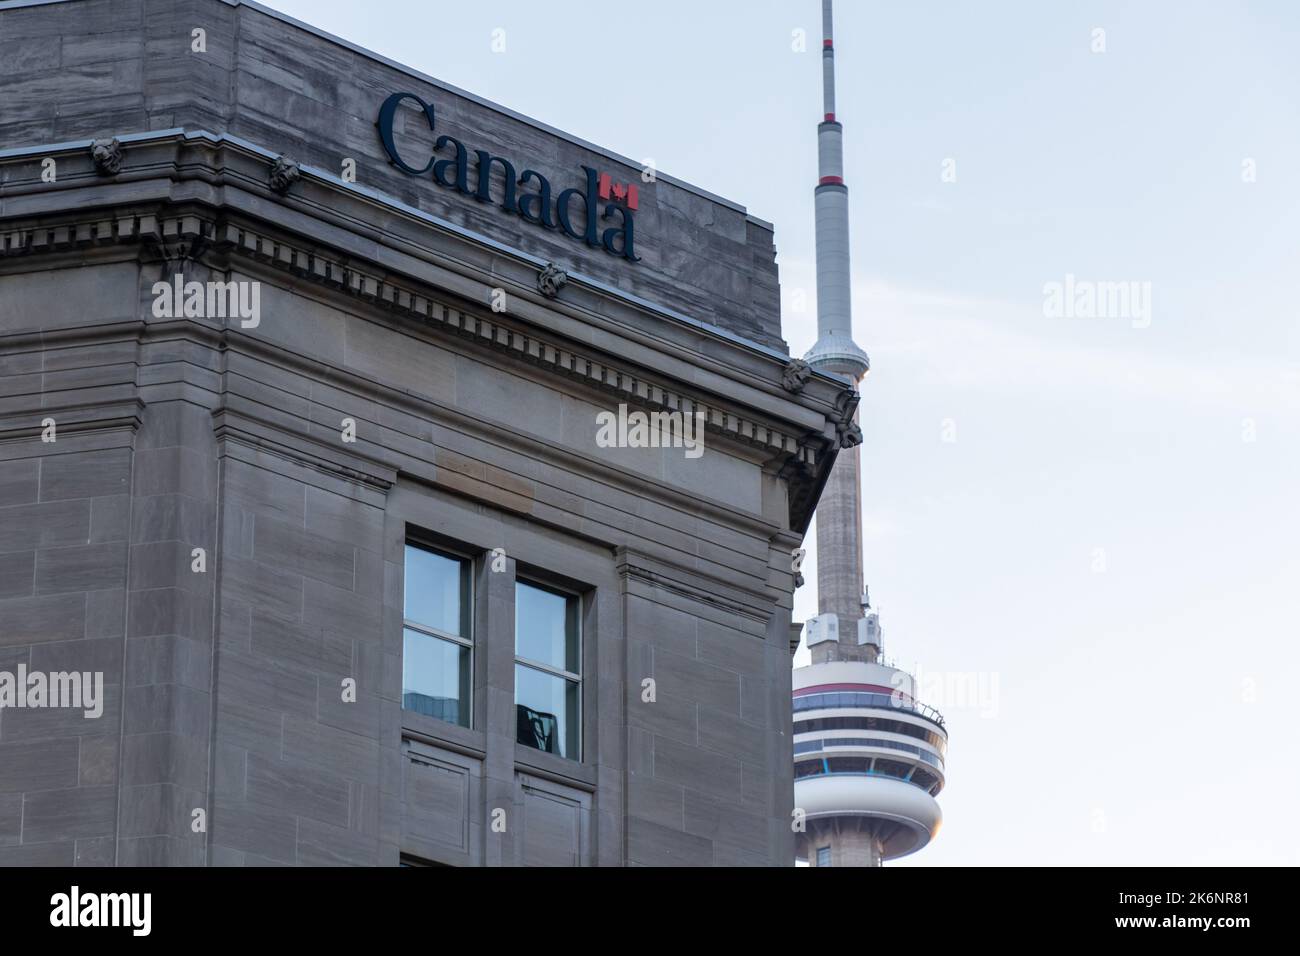 The Government of Canada logo is seen atop of a building, the Dominion Public Building, in downtown Toronto with the CN Tower in the background. Stock Photo